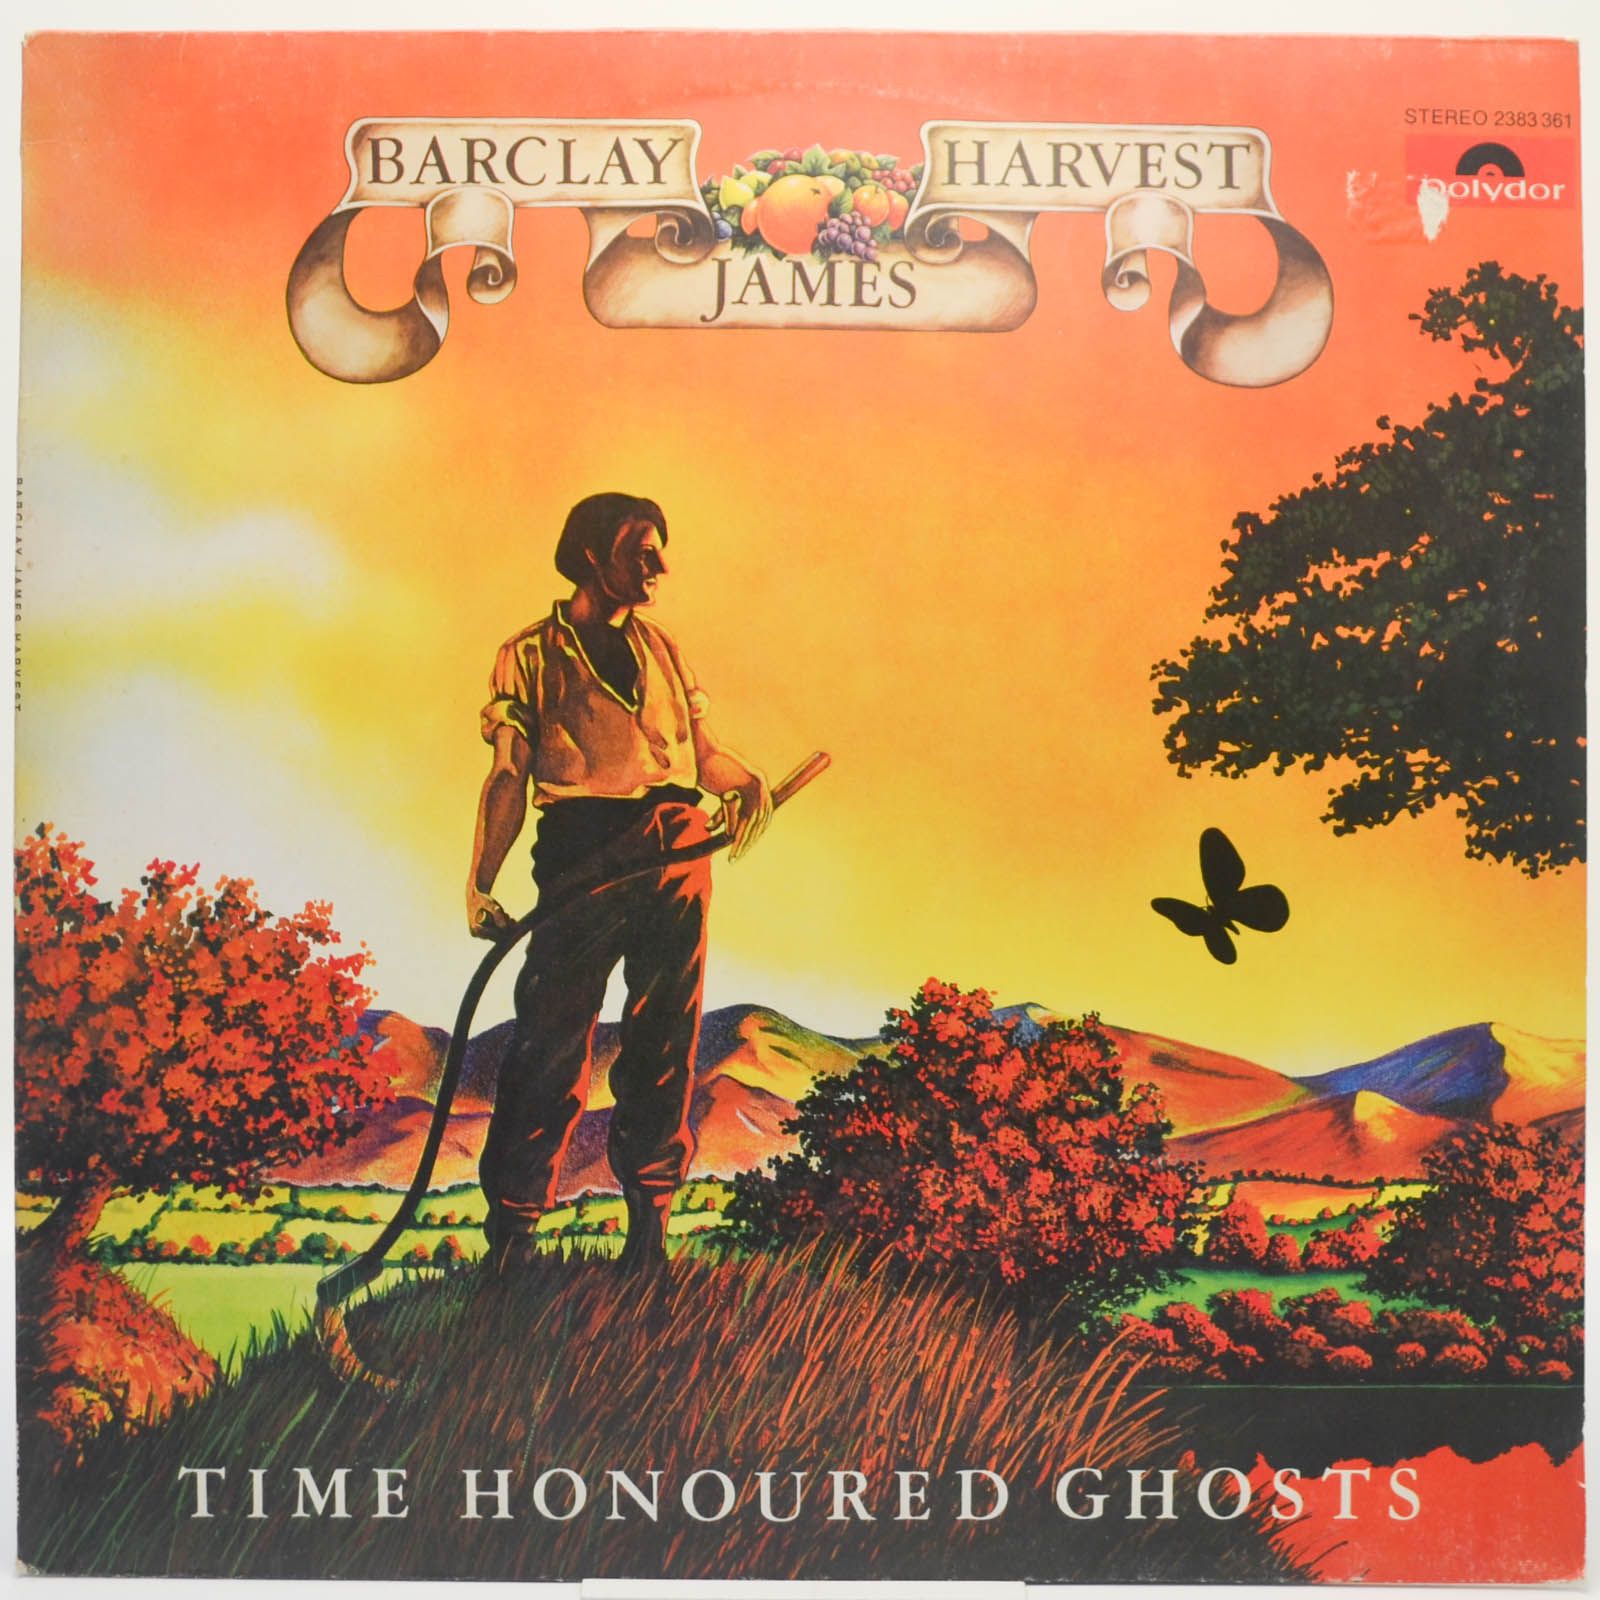 Barclay James Harvest — Time Honoured Ghosts, 1975